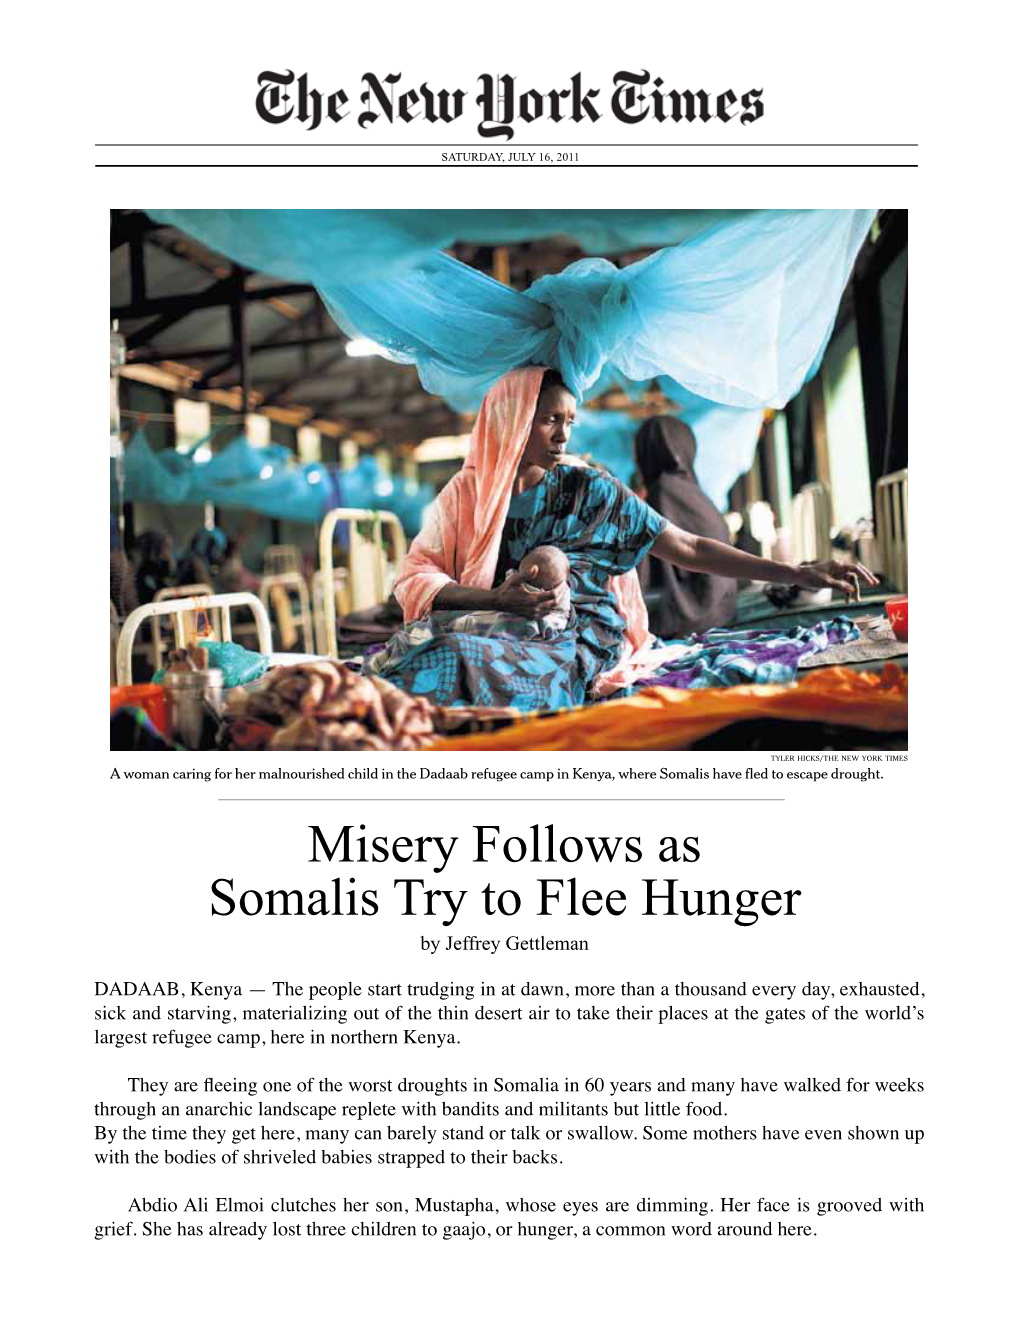 Misery Follows As Somalis Try to Flee Hunger Have Depleted Somalia’S Ability to from Page A1 SUDAN YEMEN Withstand It